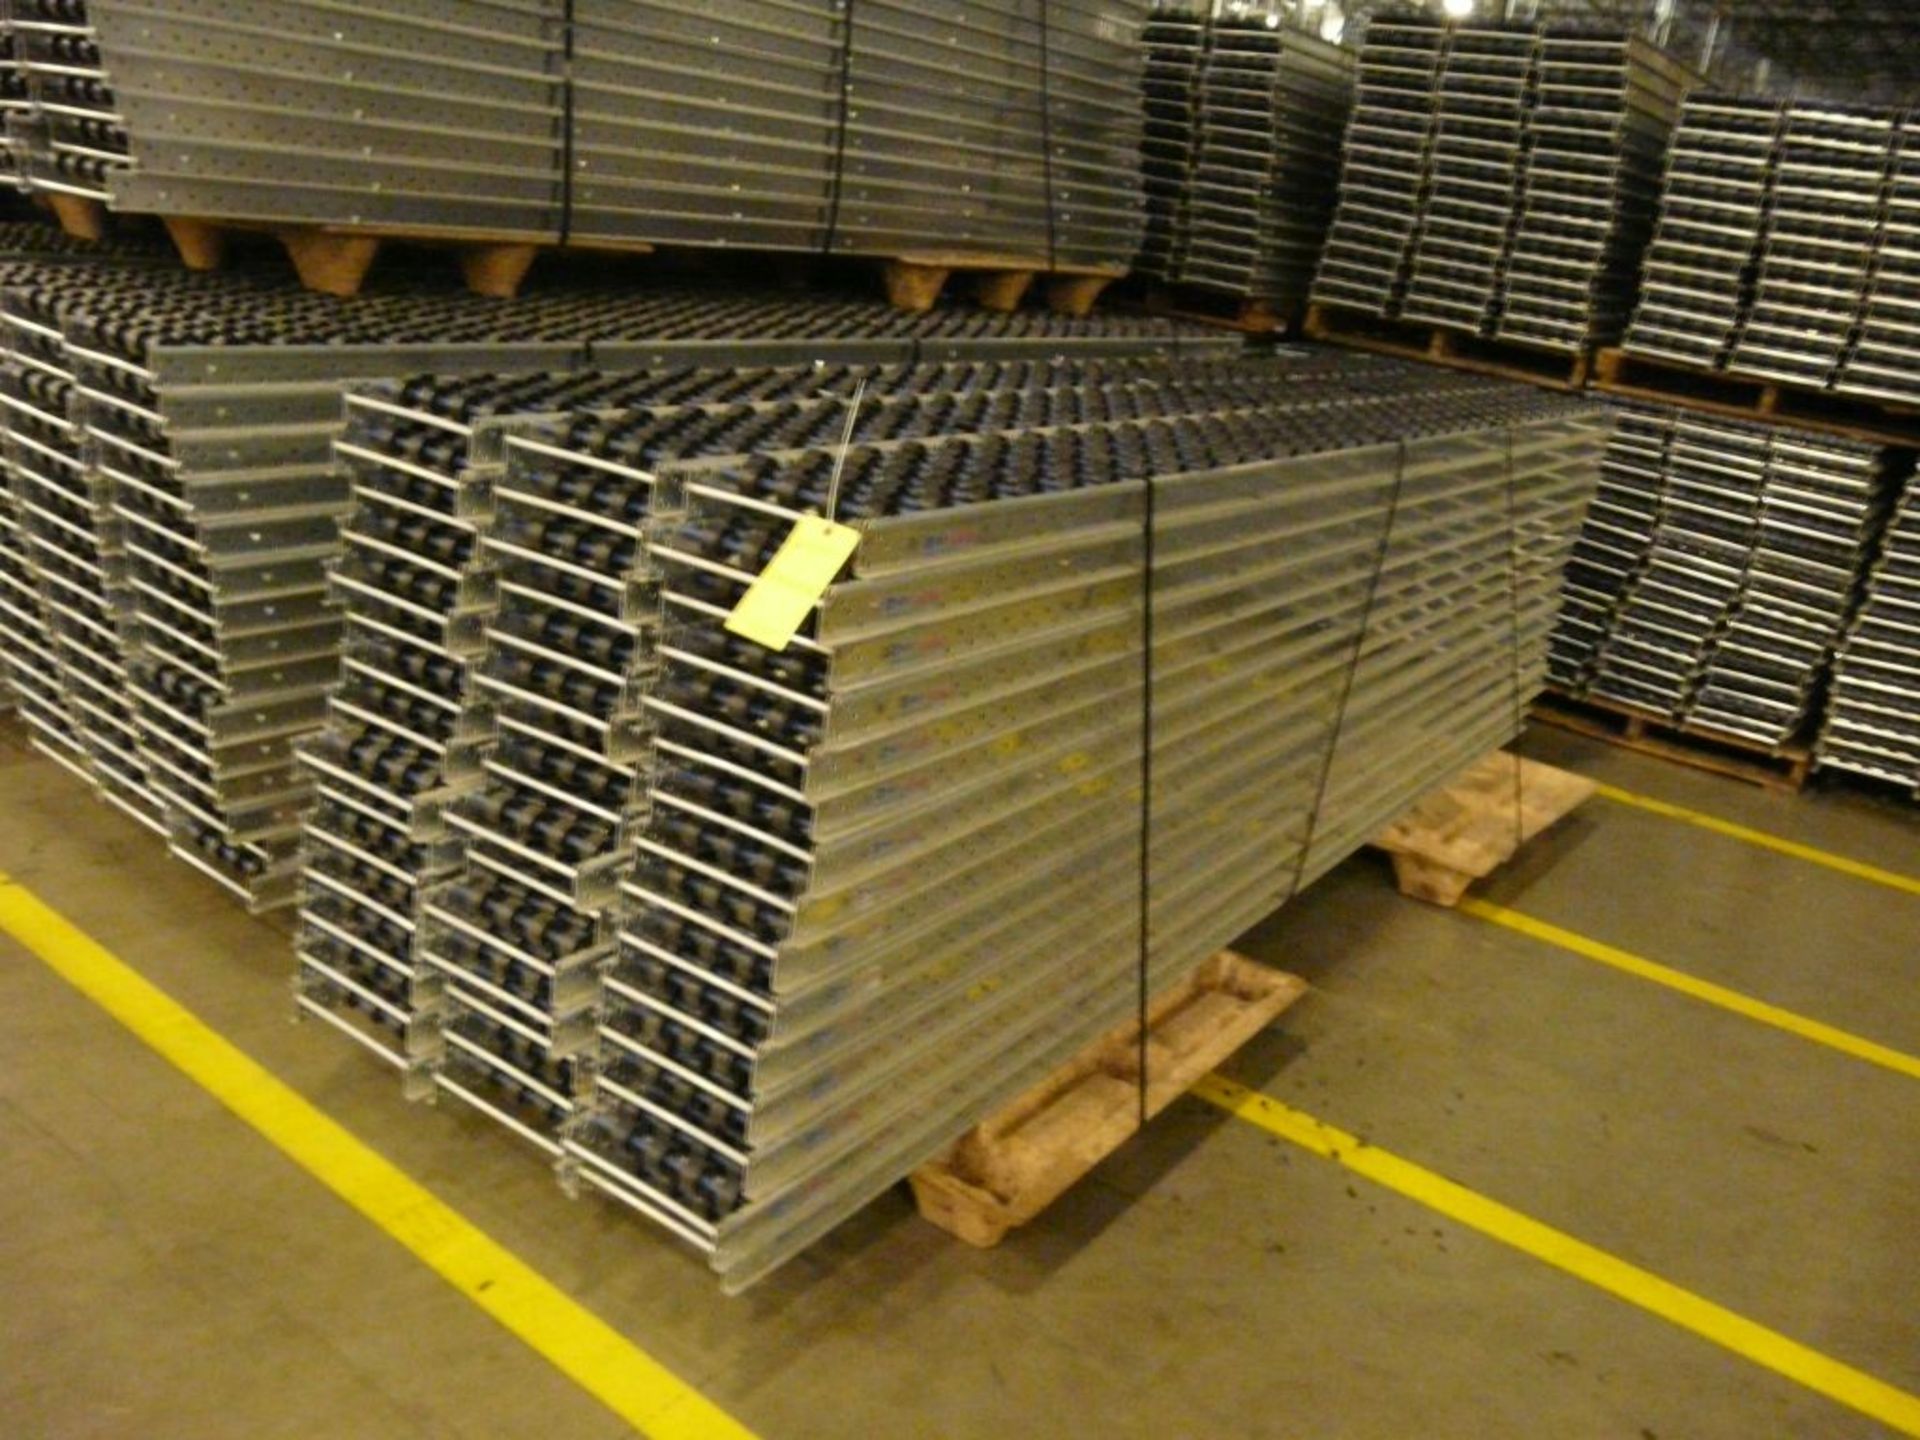 Lot of (90) SpanTrack Wheelbed Carton Flow Conveyors - 11.5'L x 11"W; Tag: 223578 - $30 Lot